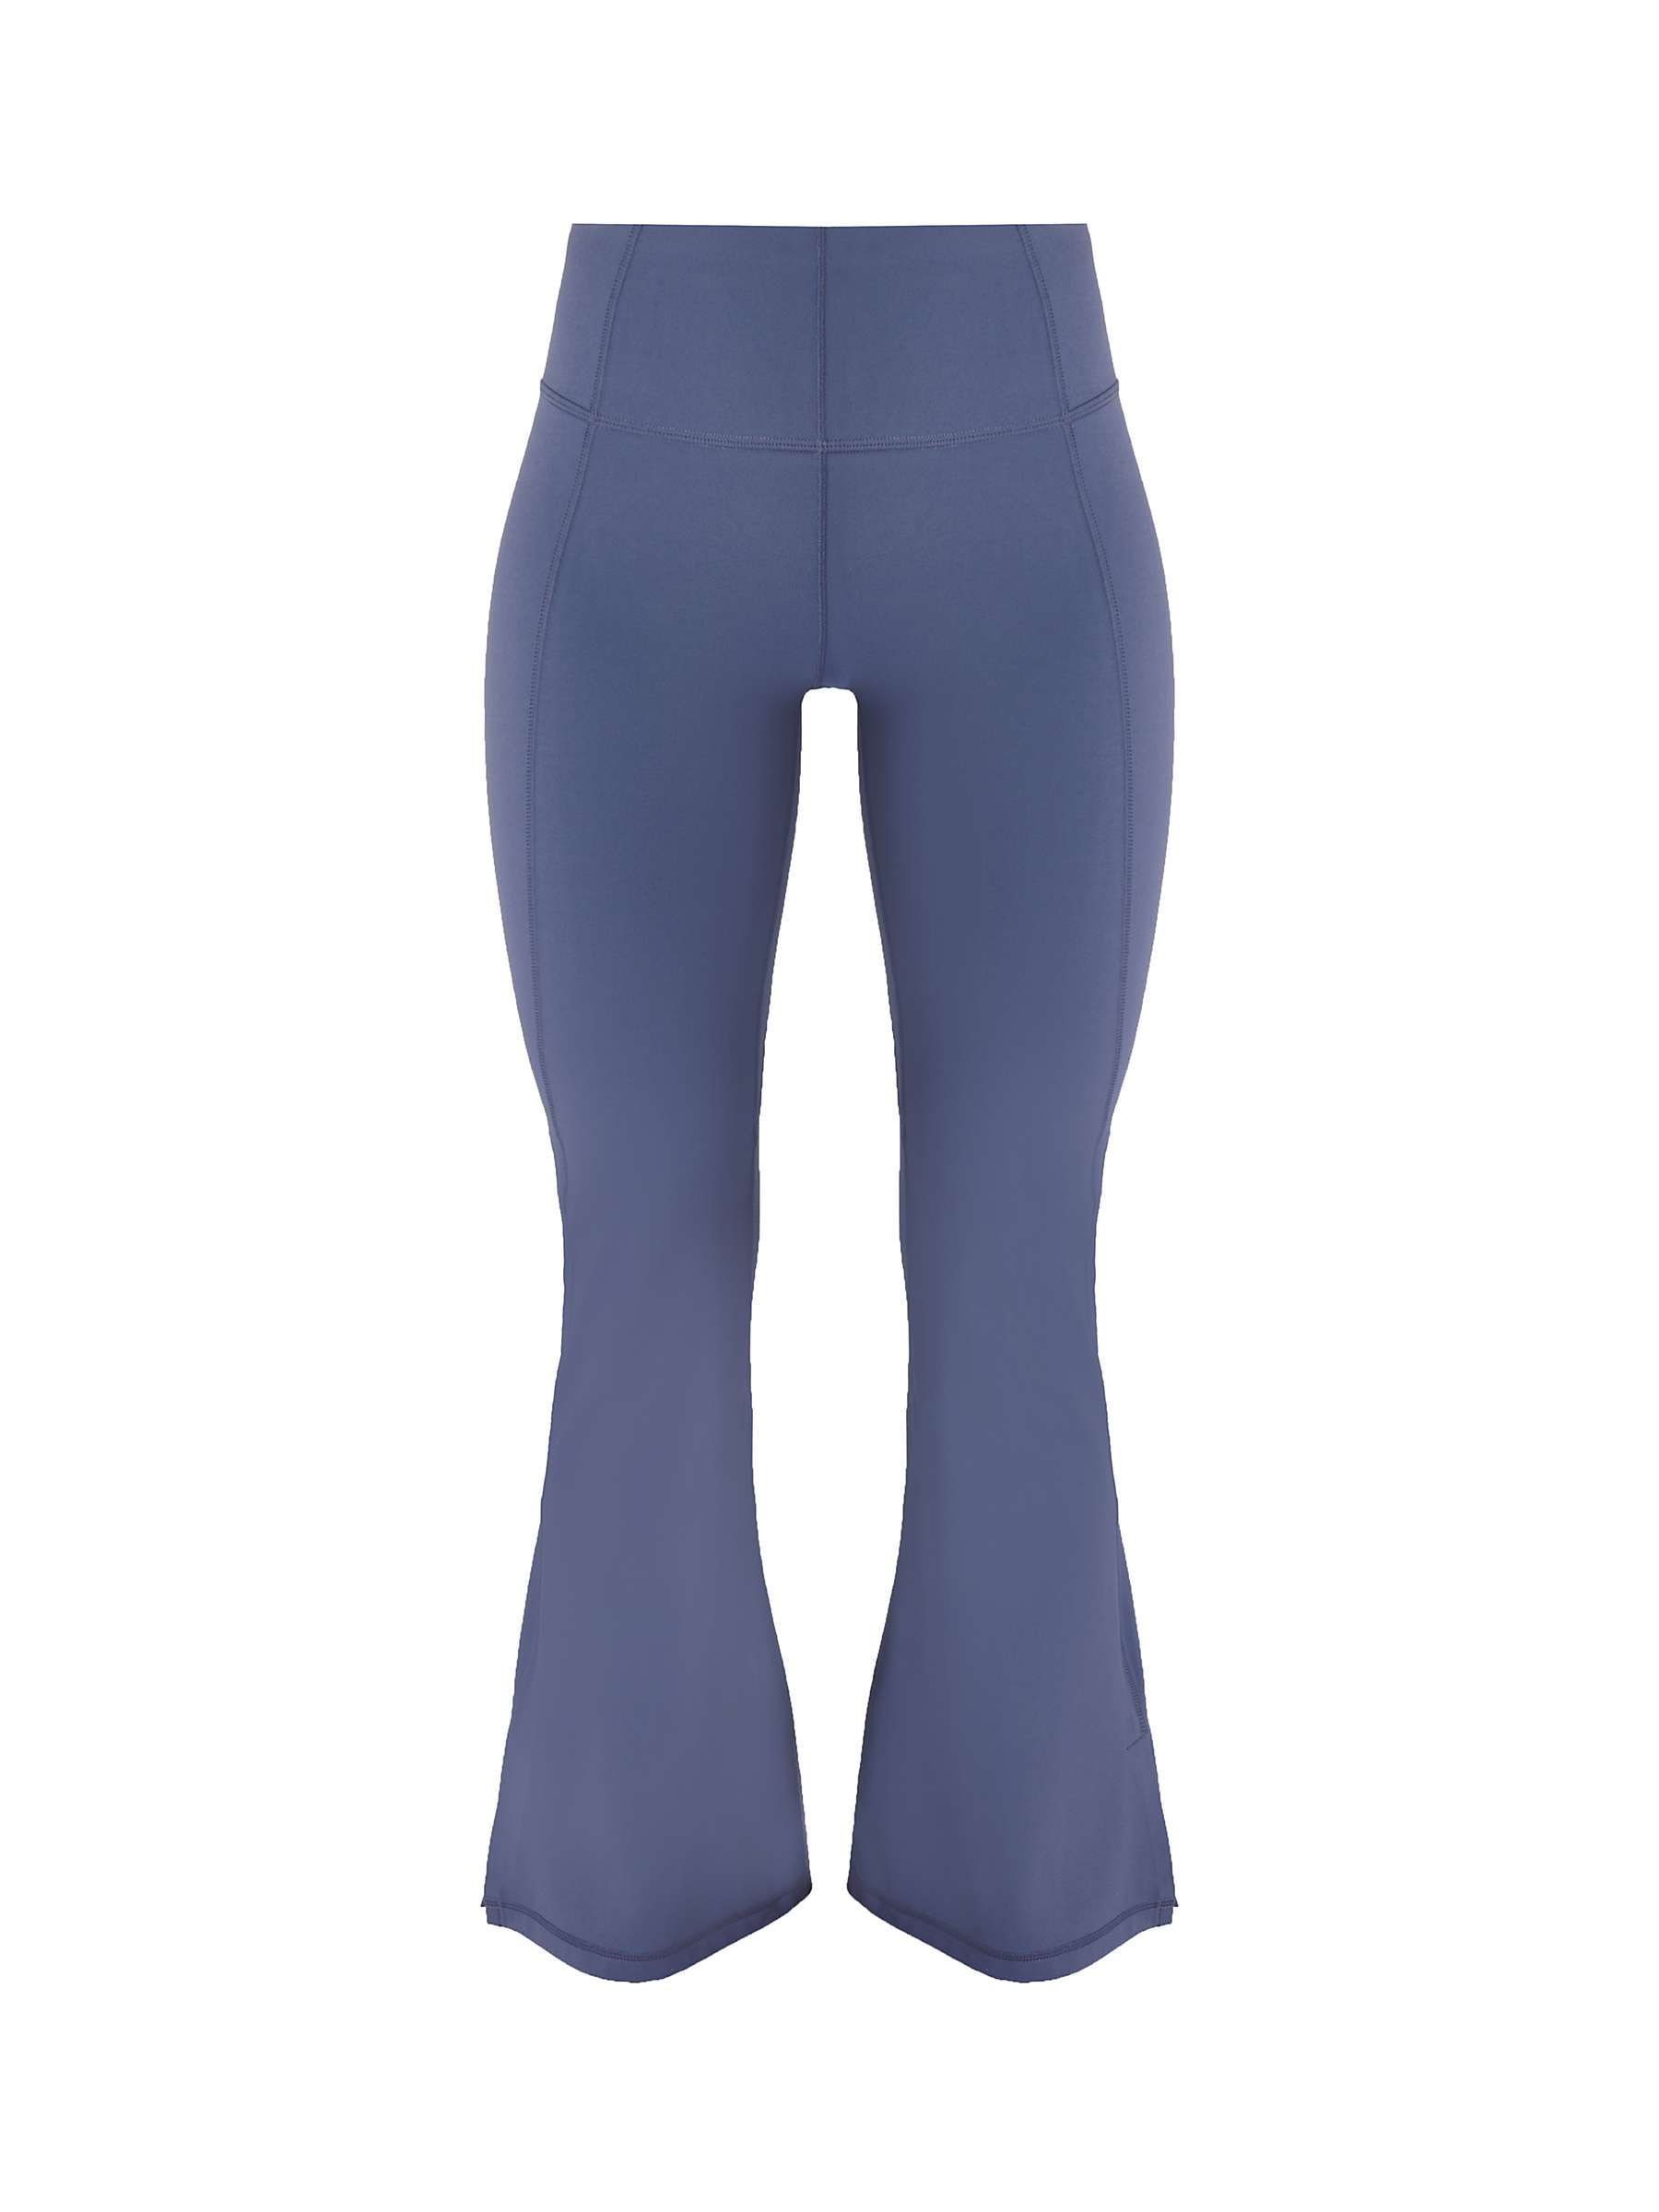 Buy Sweaty Betty 30" Super Soft Yoga Trousers, Endless Blue Online at johnlewis.com